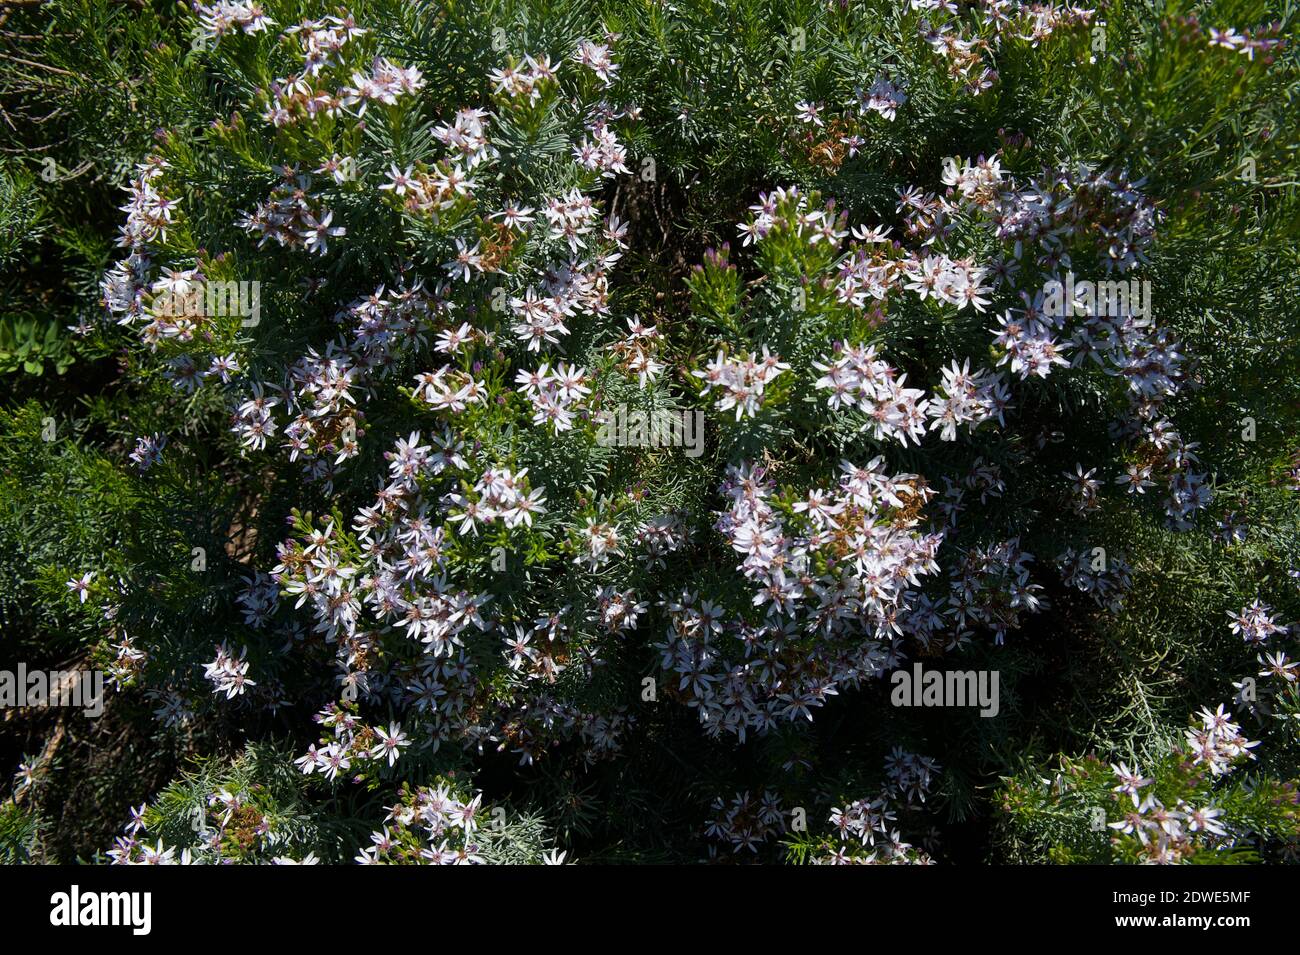 These Snowy Daisy bushes (Olearia Lirata) are everywhere in Point Nepean National park - strangely named for a plant which never sees any snow! Stock Photo